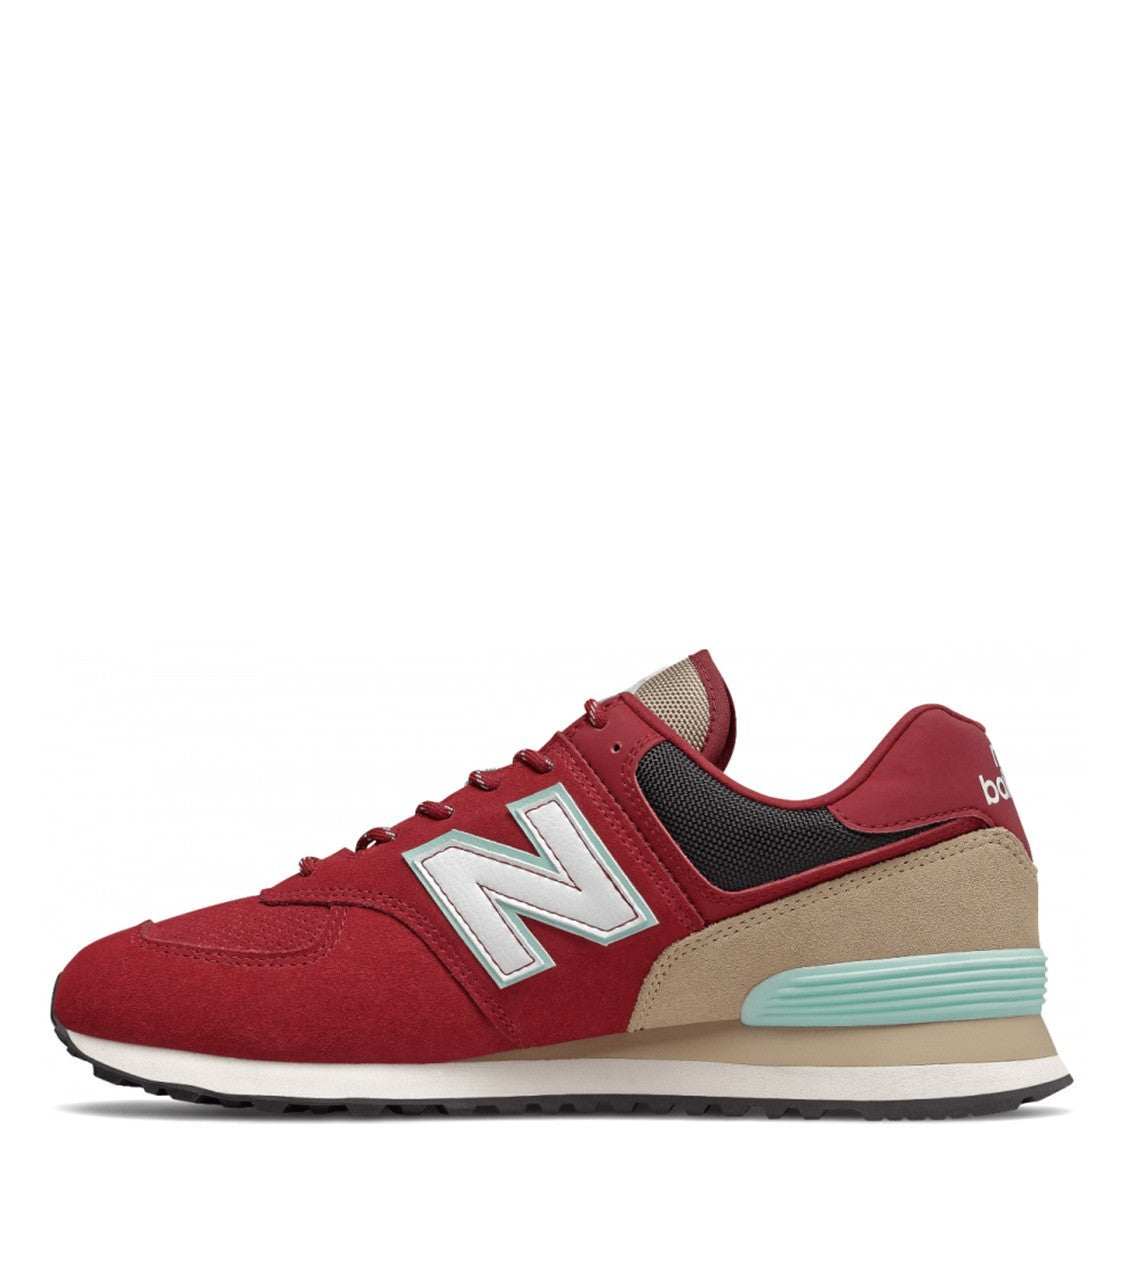 NEW BALANCE 574 RED TAN – PRIVATE